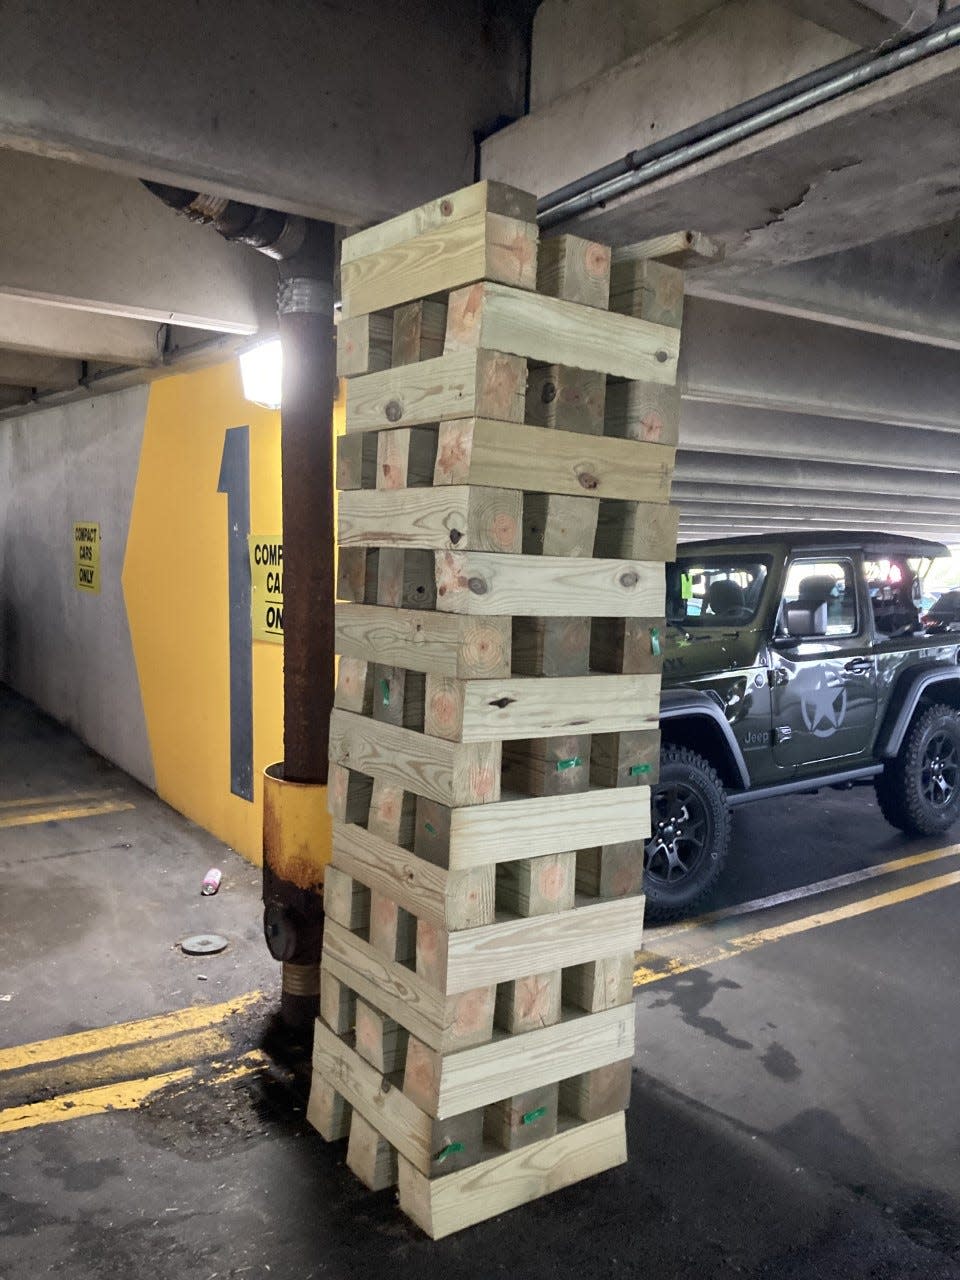 As a precaution, the city installed these reinforcements at the Pearl Street parking garage pending a survey by a structural engineer.